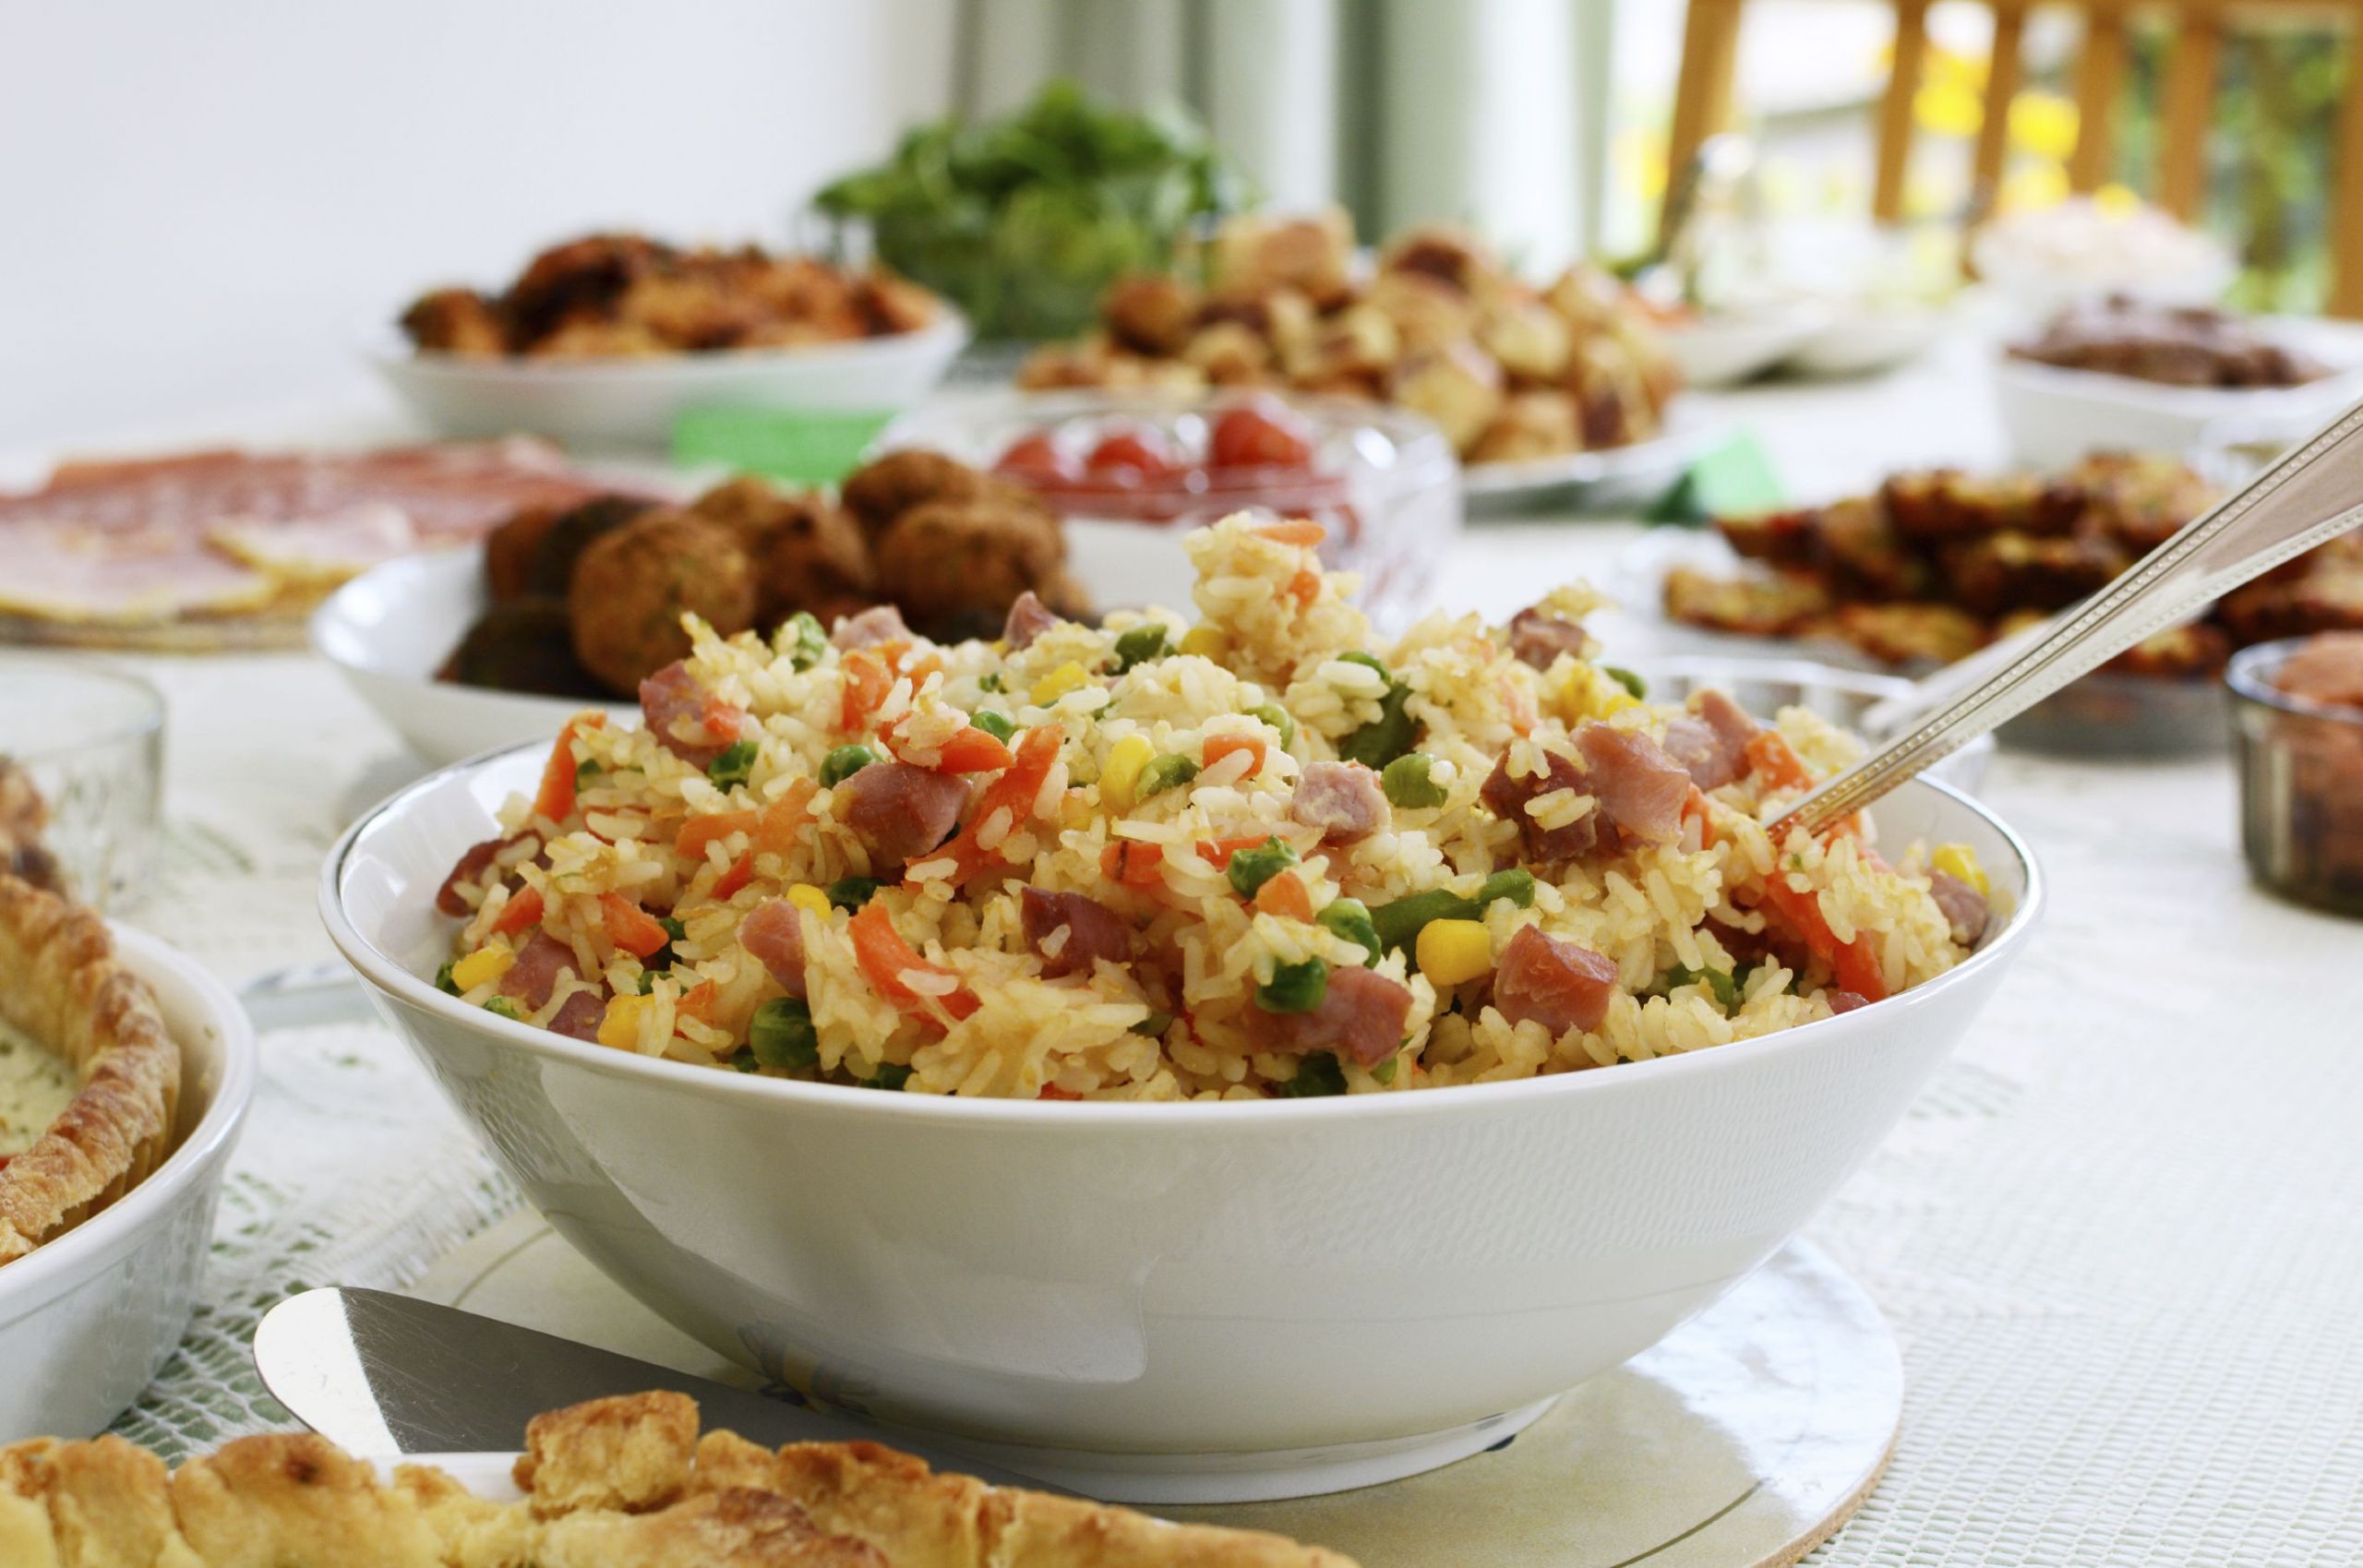 Easy Work Party Food Ideas
 30 Potluck Themes for Work Events